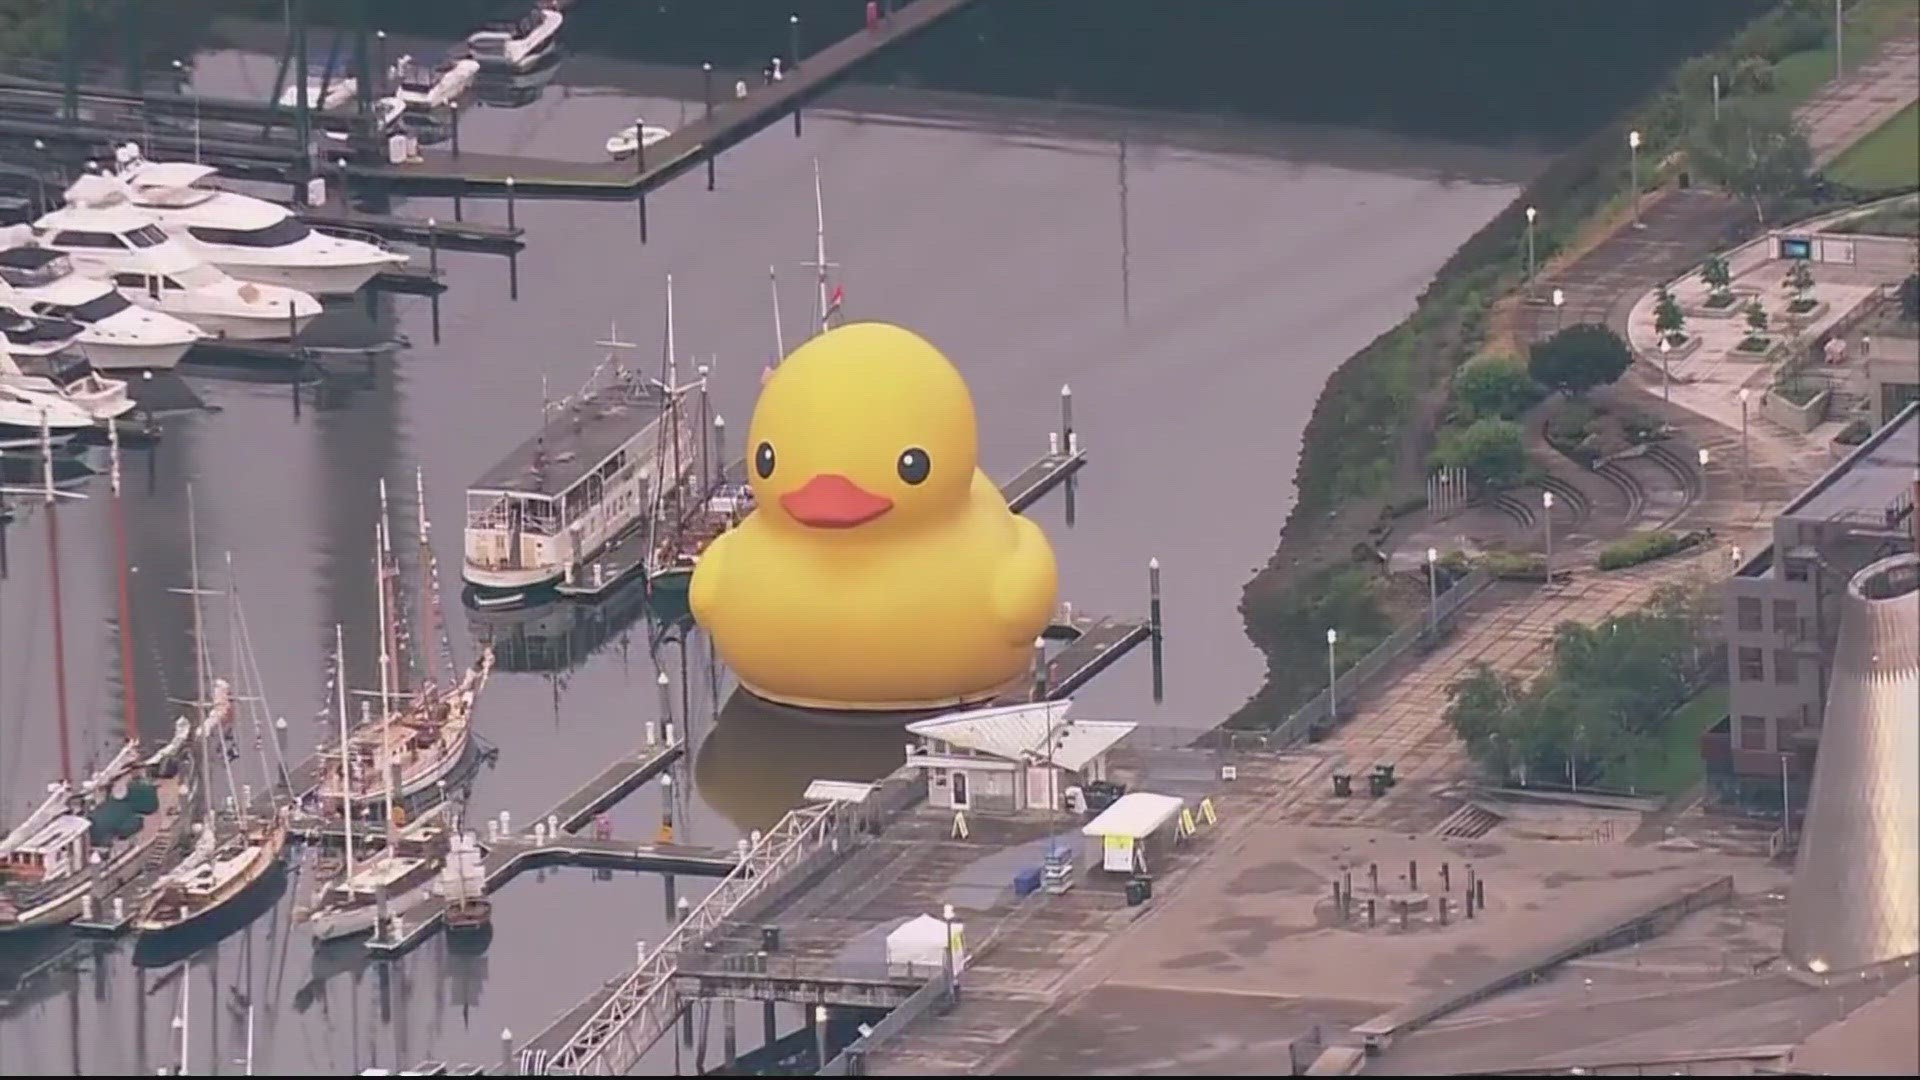 The world's largest rubber duck is coming to this Maryland town